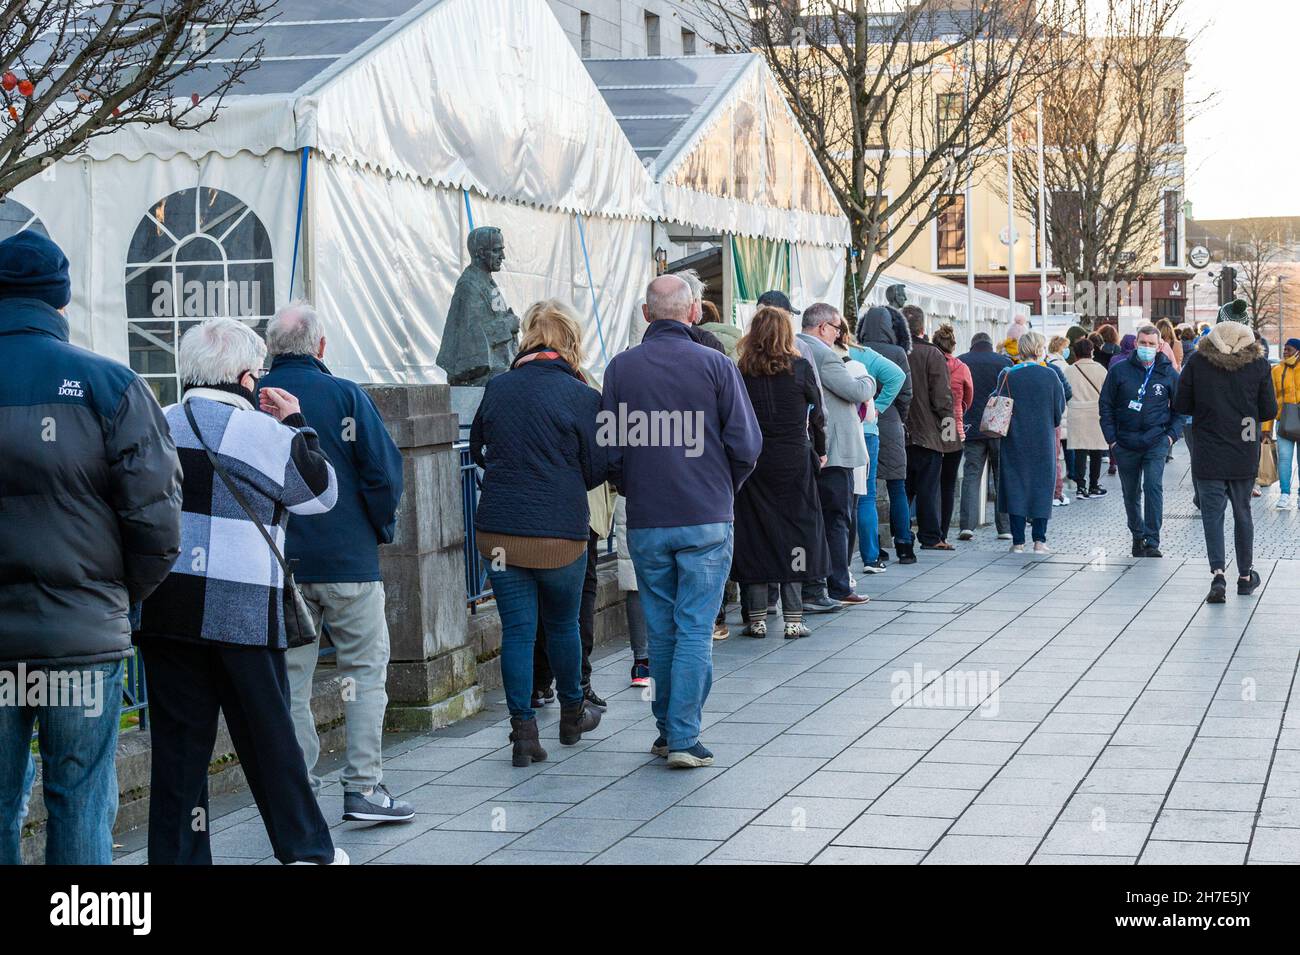 Cork, Ireland. 22nd Nov, 2021. Around 150 students There were big queues at Cork City Vaccination Centre in Cork City Hall this afternoon for COVID-19 jabs. Credit: AG News/Alamy Live News Stock Photo